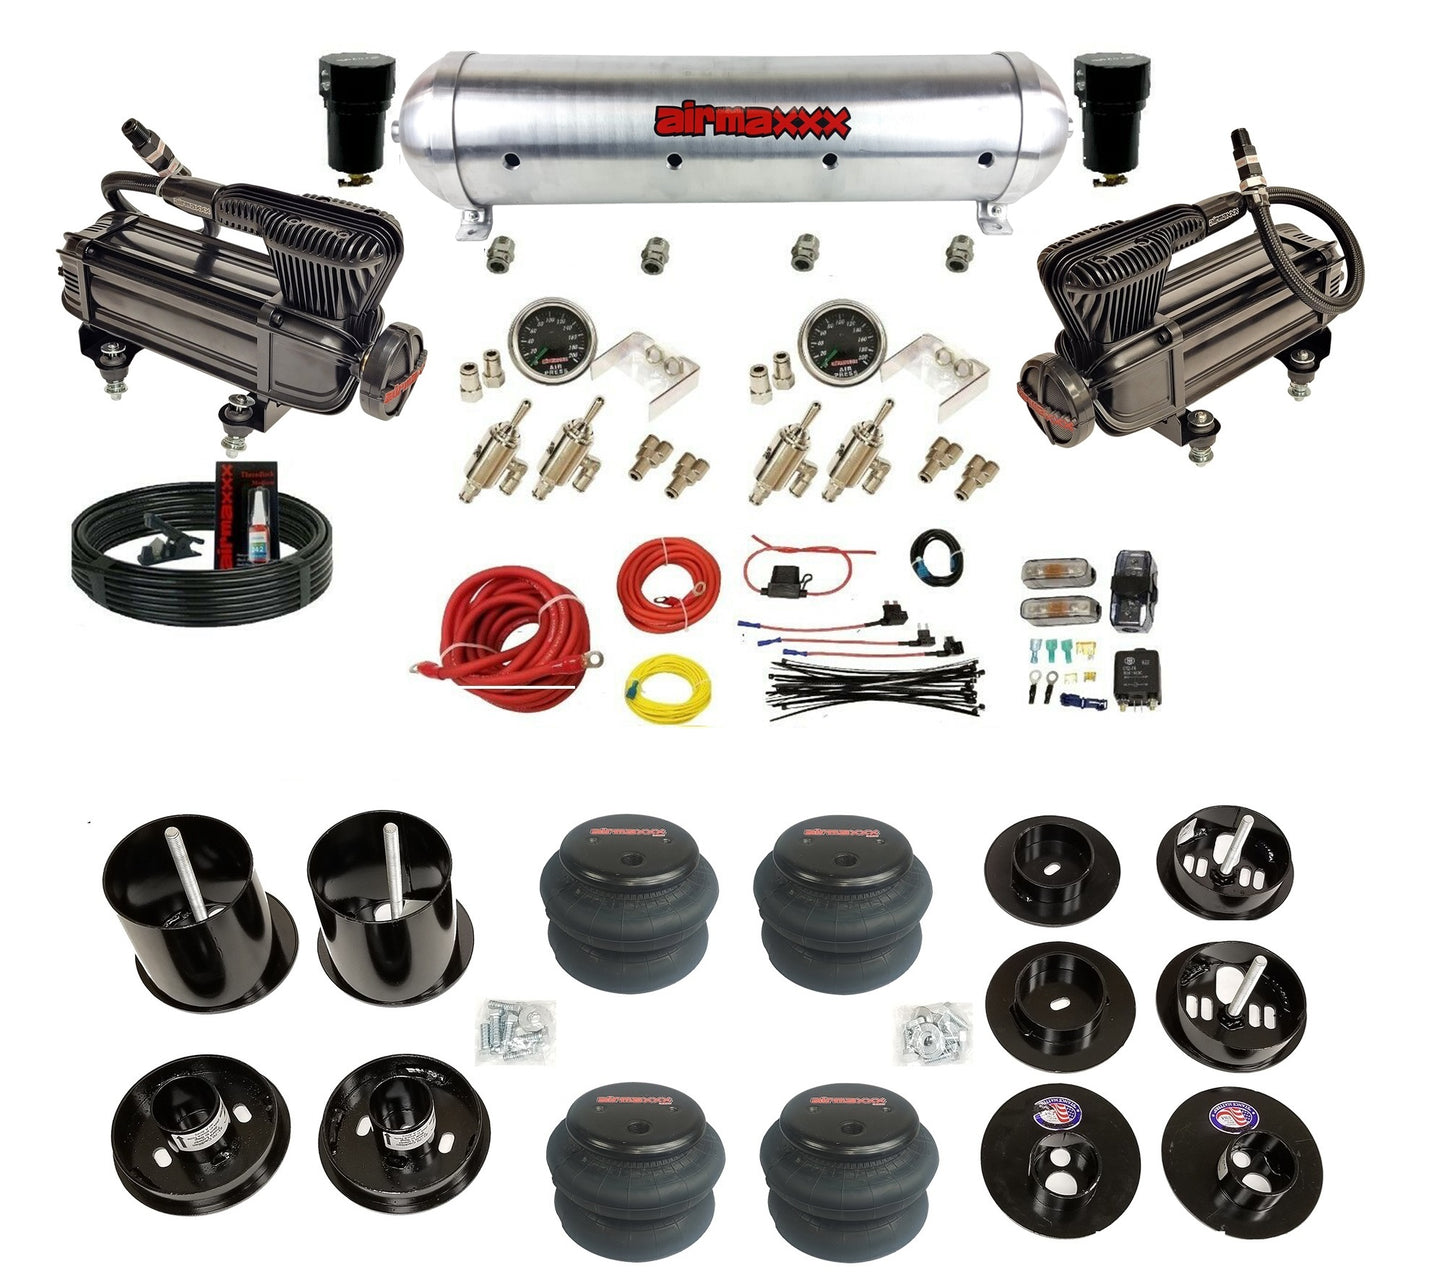 3/8" Manual Air Suspension Kit w/480 Chrome Compressors Fits 1965-70 Cadillac